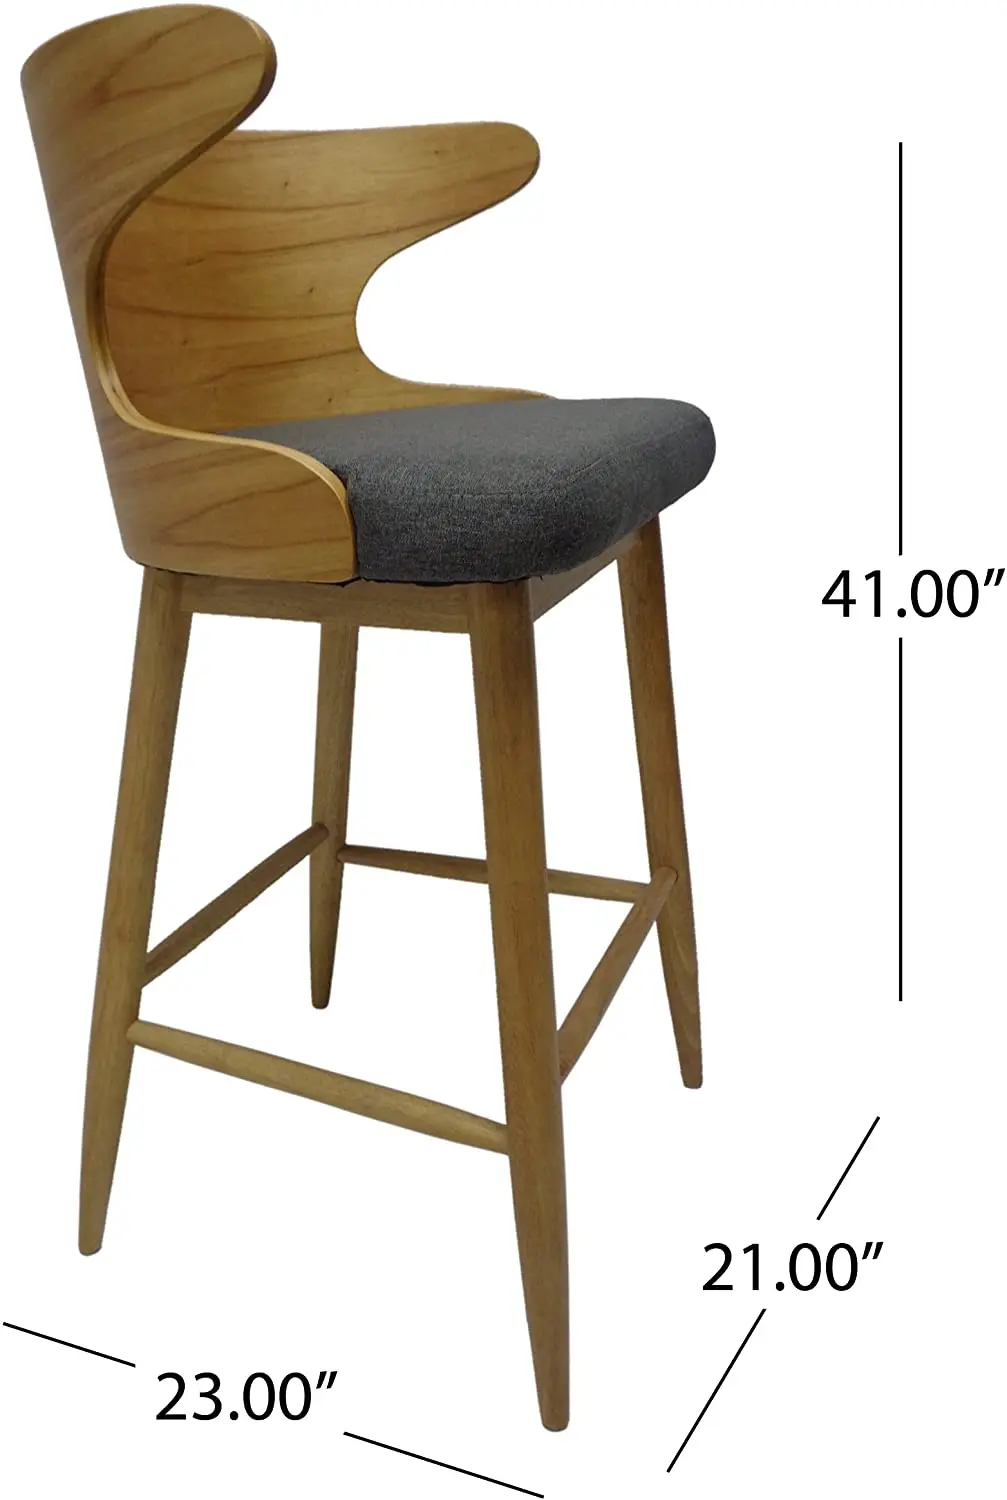 Mid Century Wood Kitchen Counter Upholstered Height Bar Stools Buy Upholstered Bar Stool Kitchen Bar Stools Counter Height Bar Stools Product On Alibaba Com